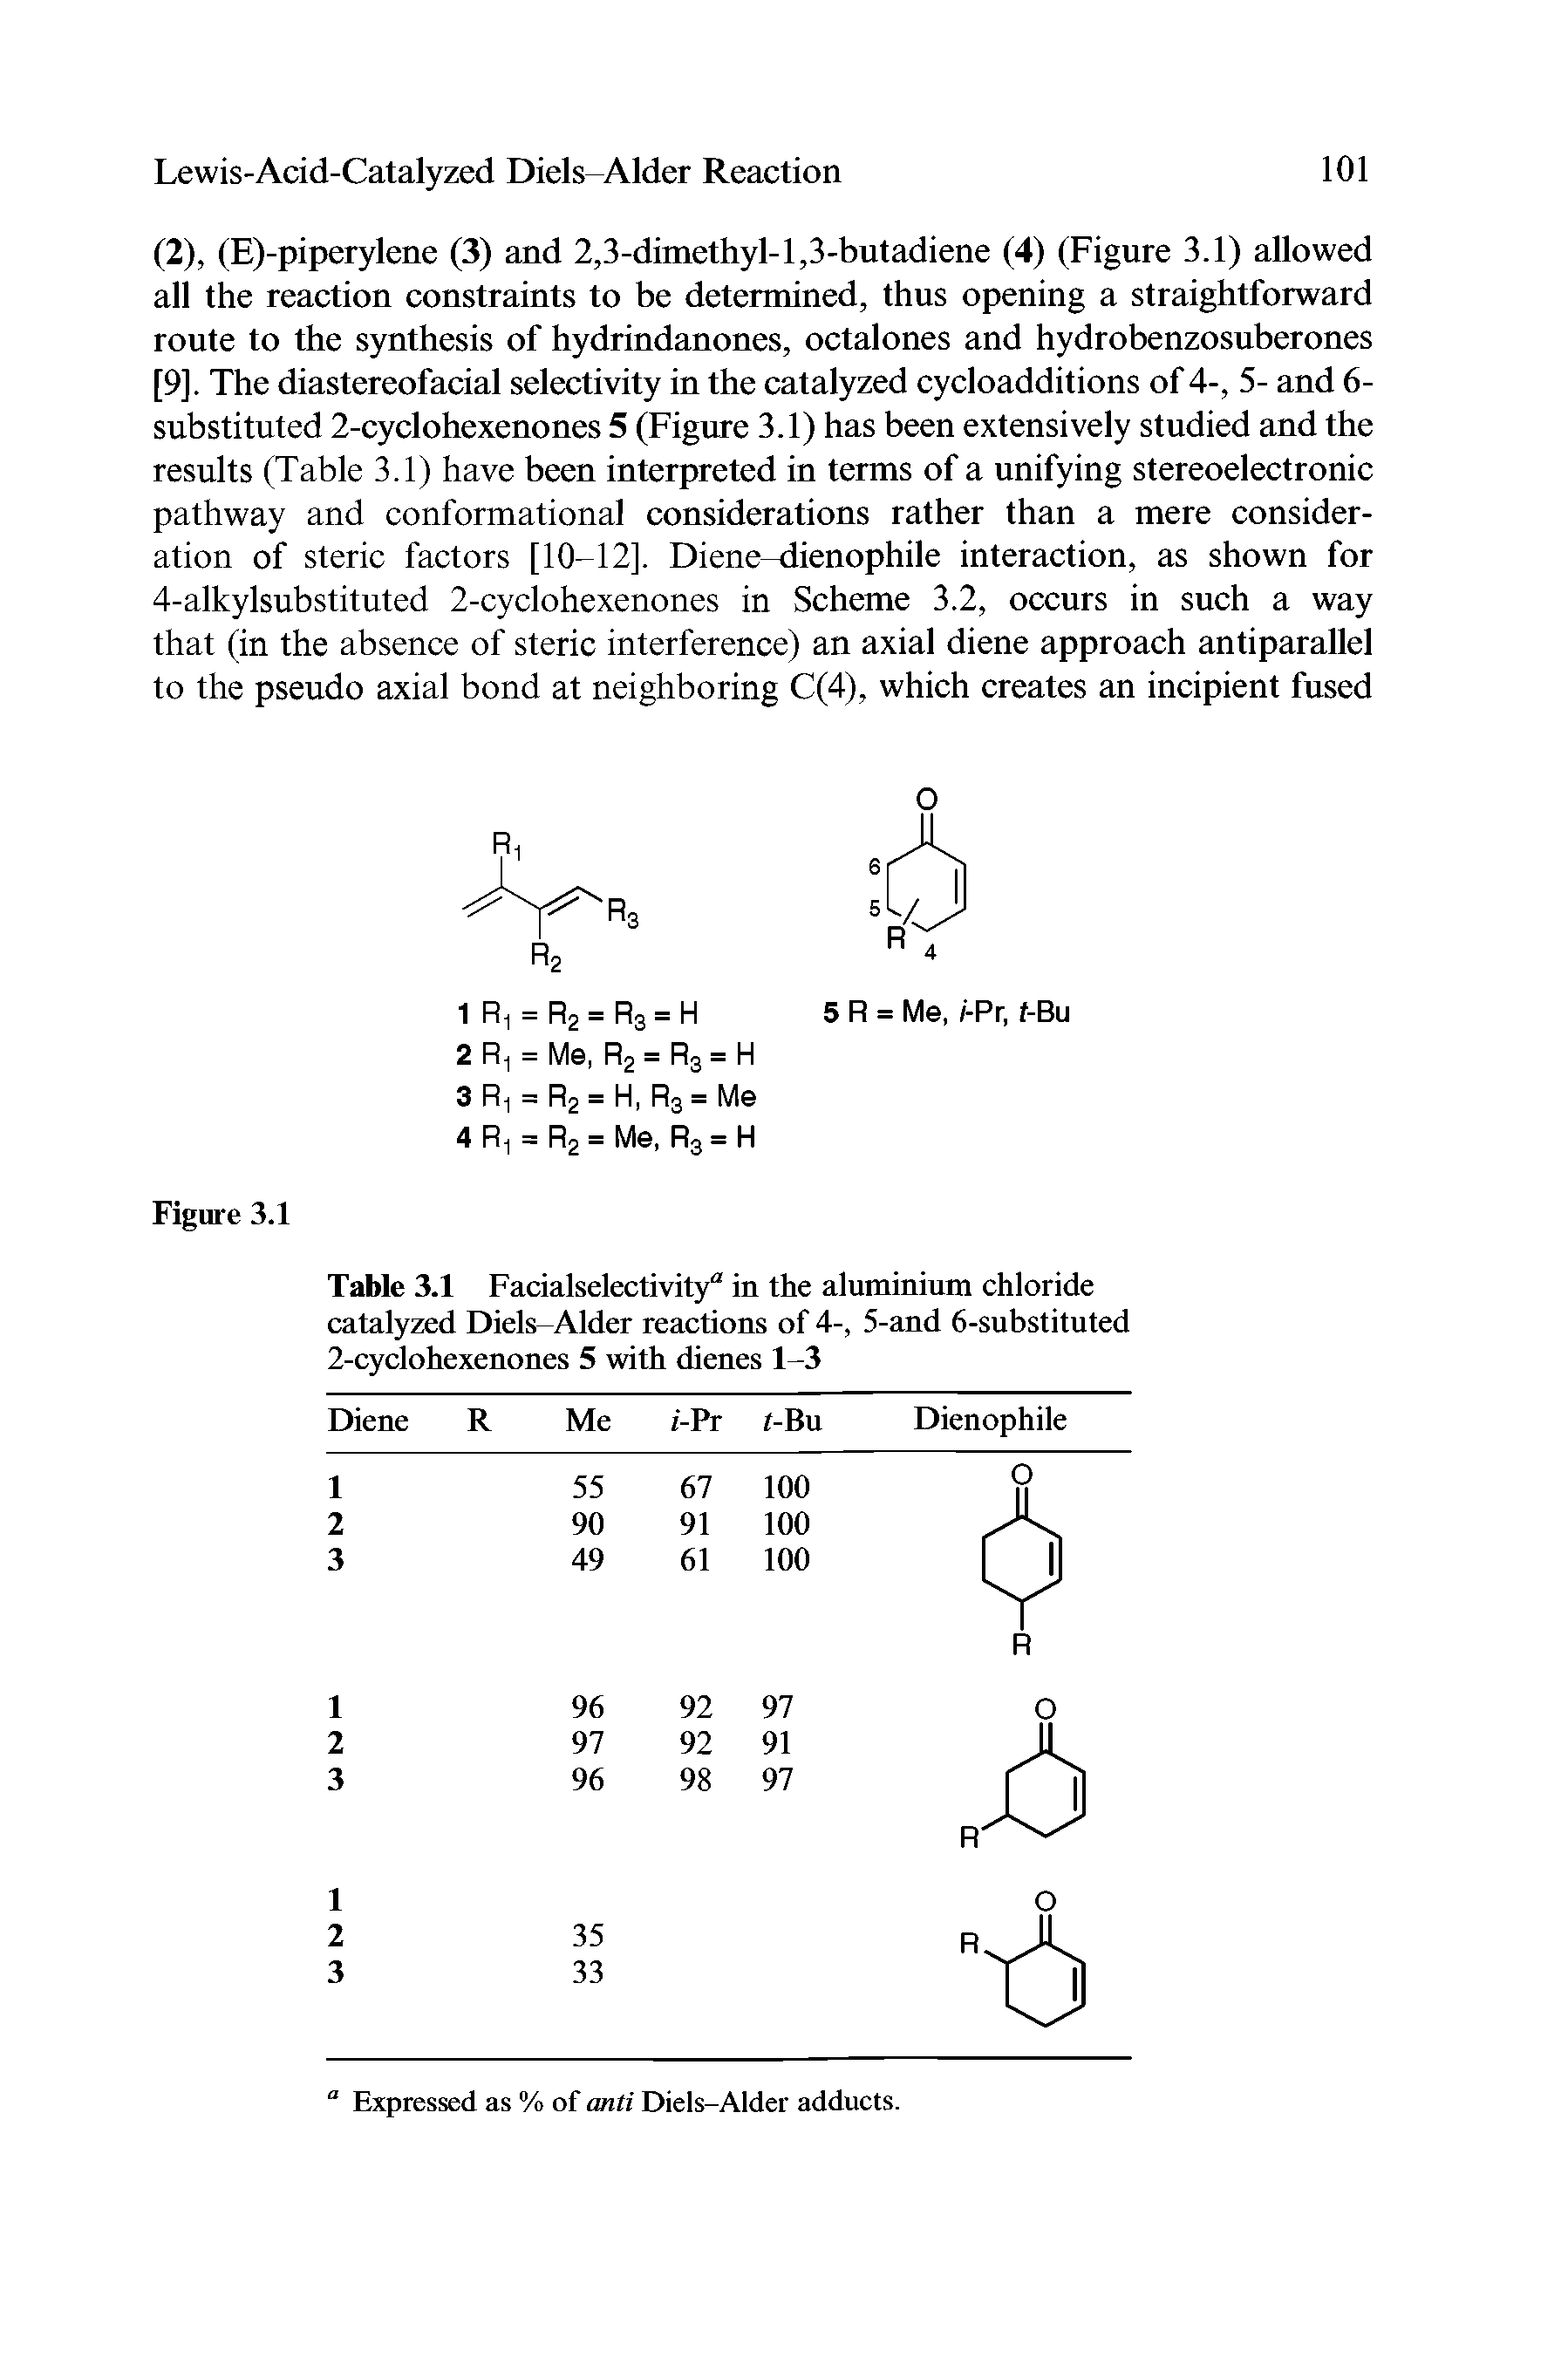 Table 3.1 Facialselectivity" in the aluminium chloride catalyzed Diels-Alder reactions of 4-, 5-and 6-substituted 2-cyclohexenones 5 with dienes 1-3...